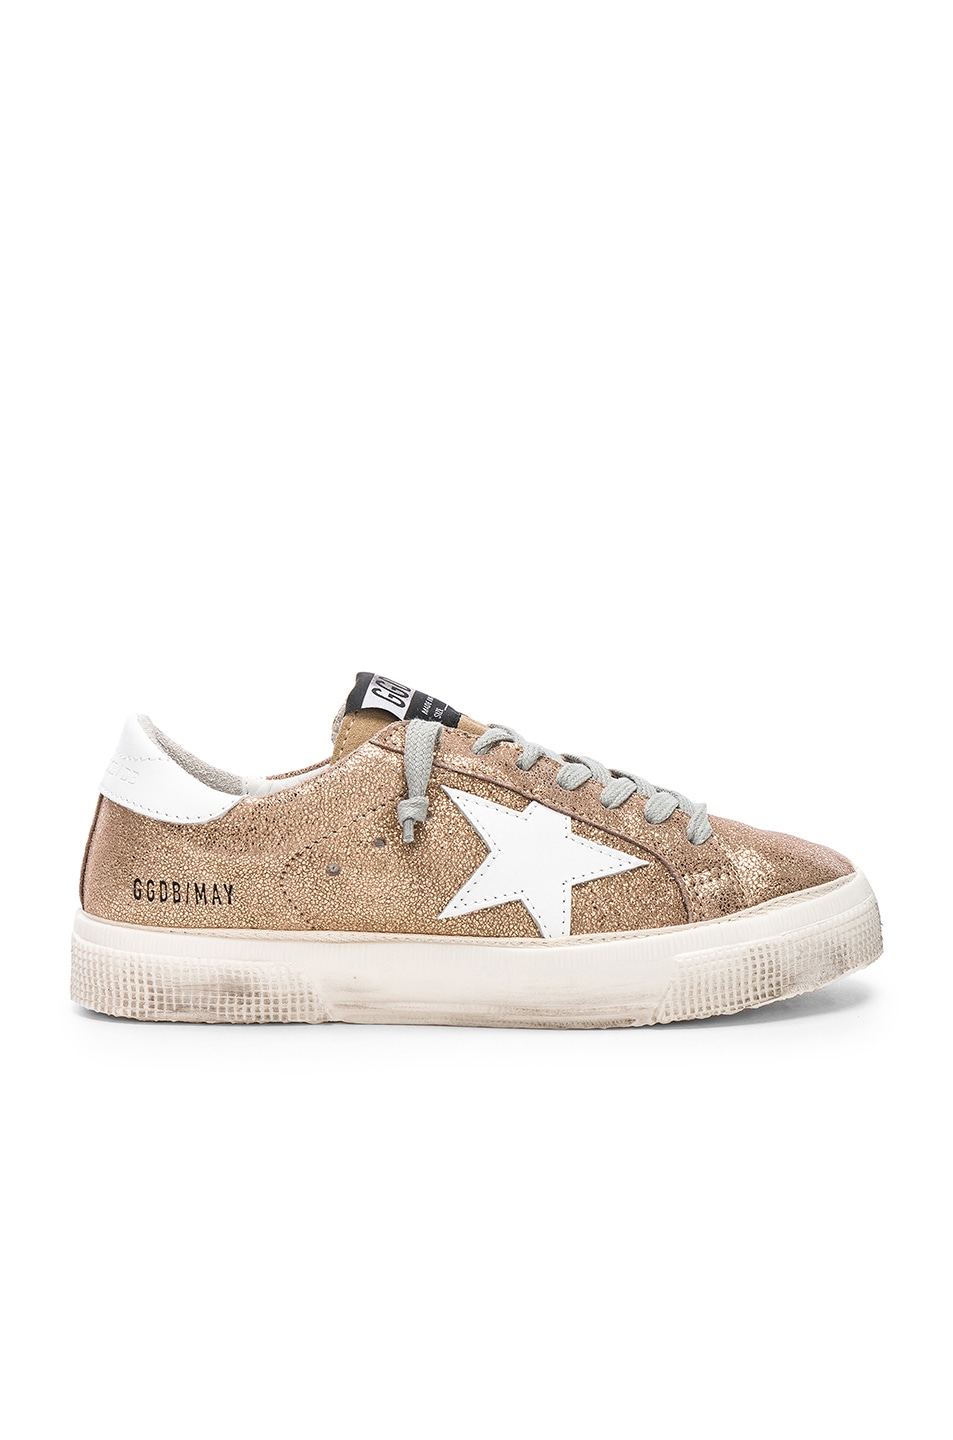 Image 1 of Golden Goose May Sneakers in Gold Crack & White Star